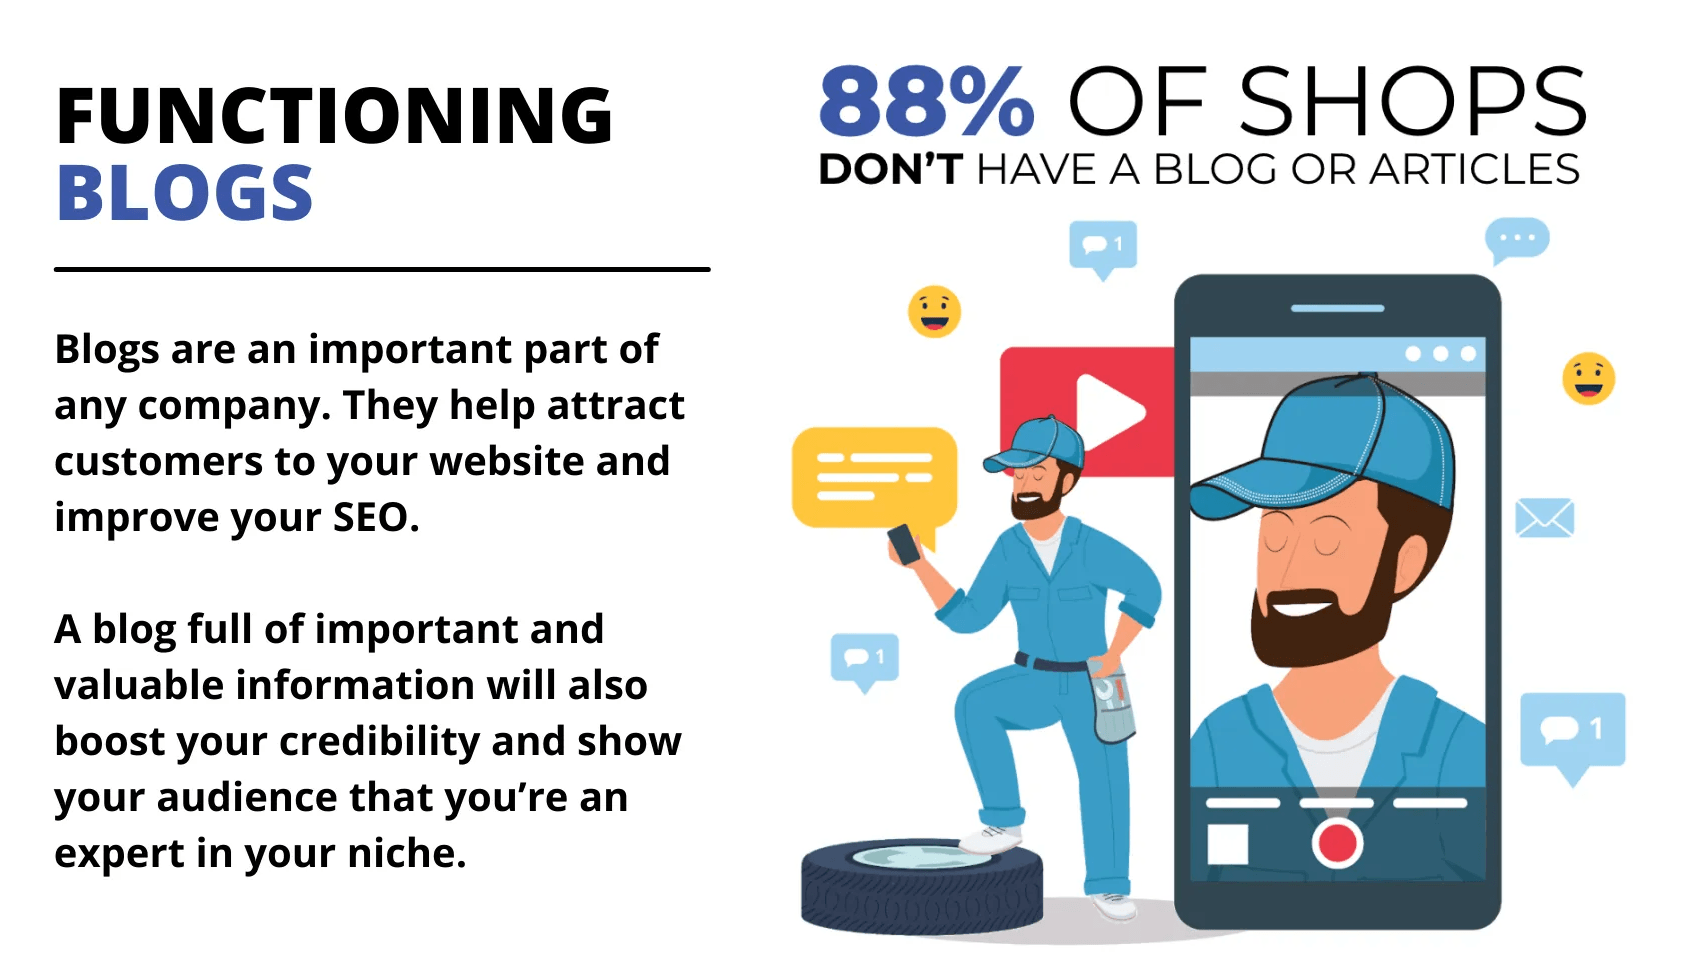 88% of shops don't have a blog or articles